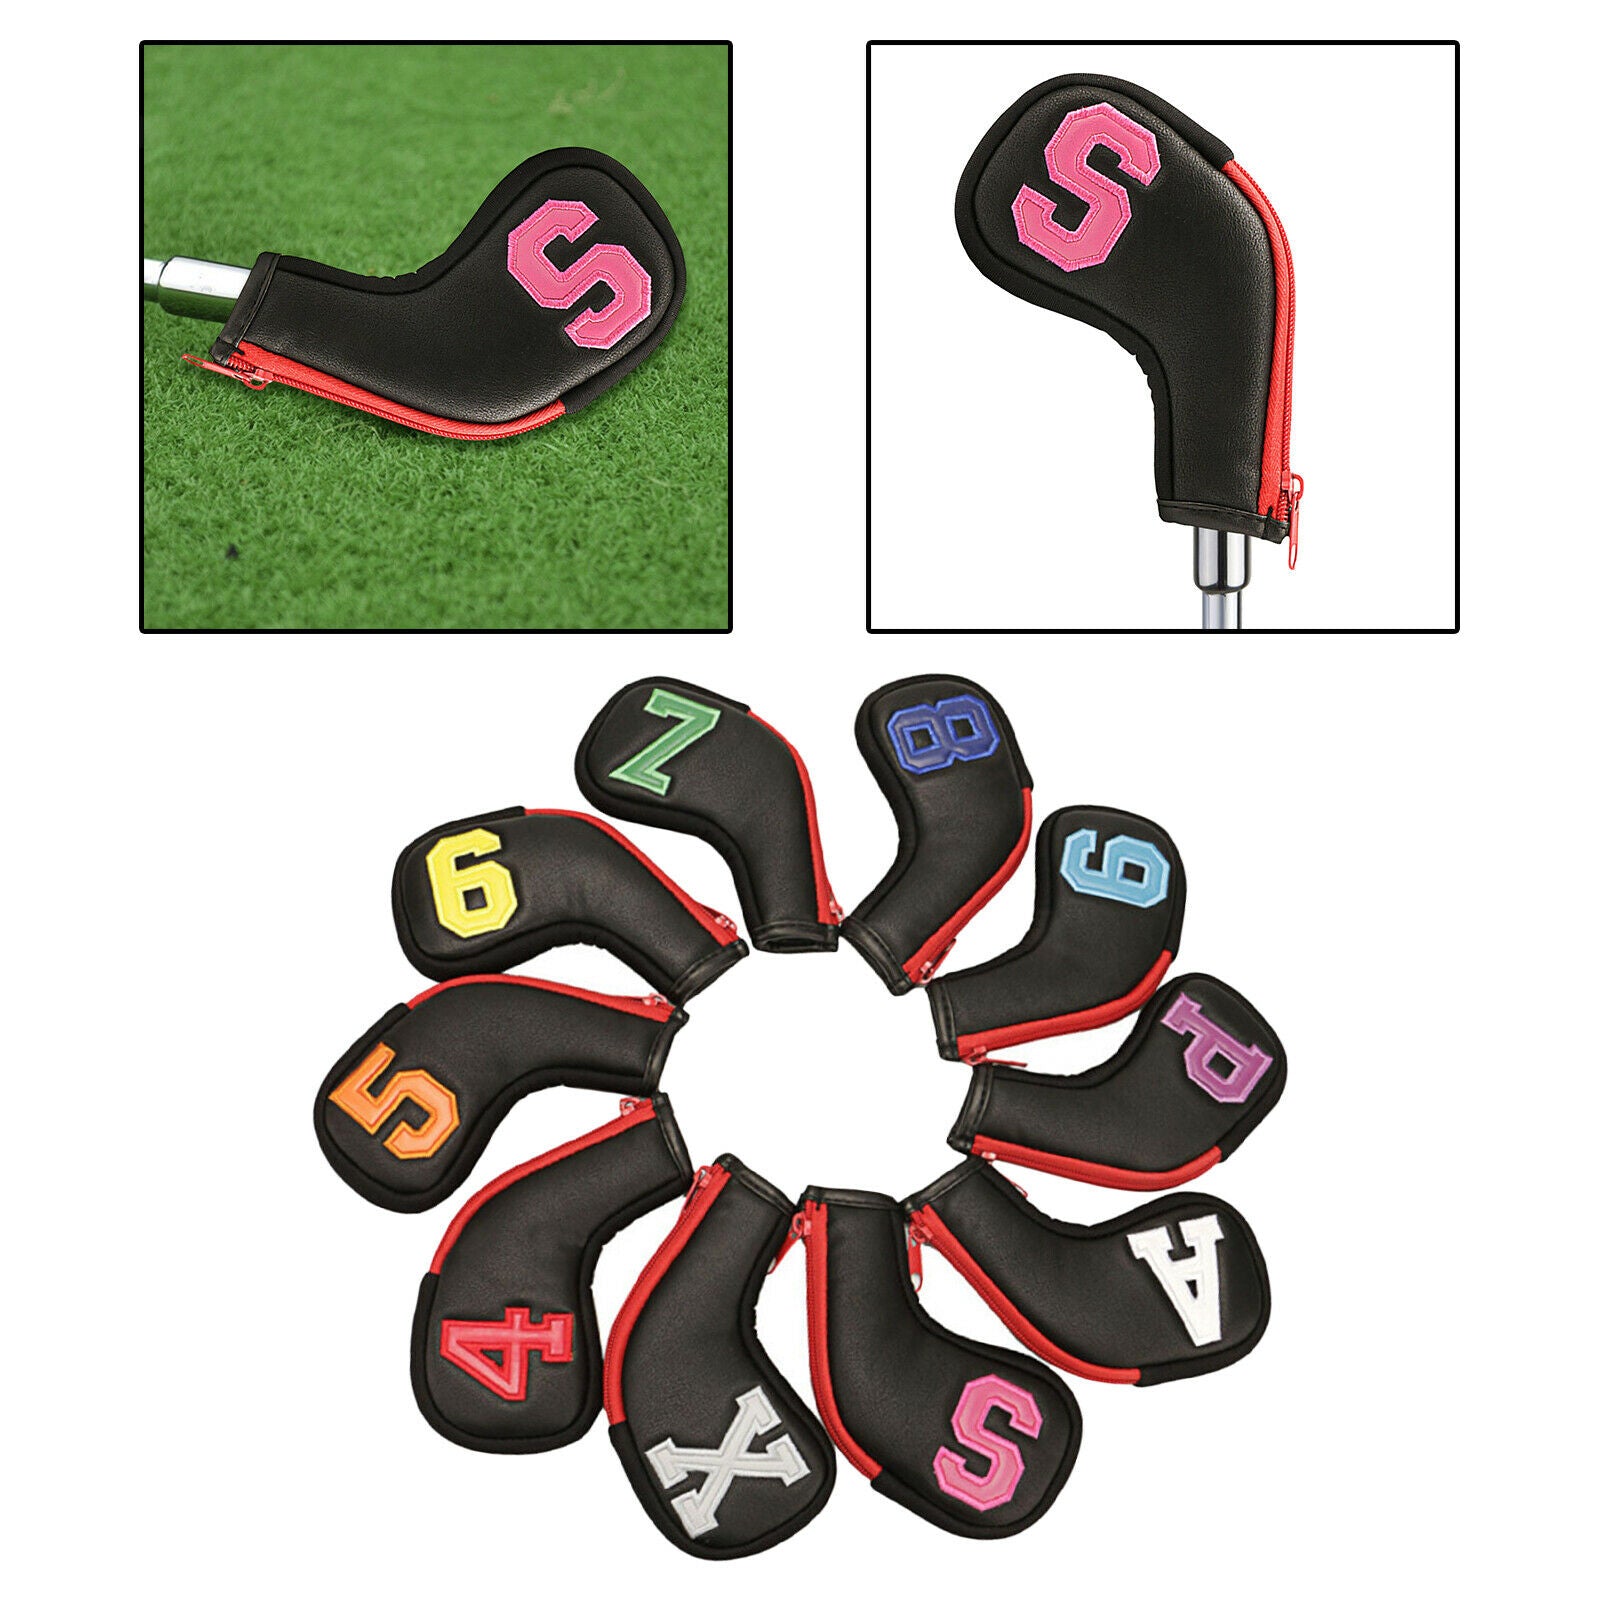 10Pcs Leather Golf Club Iron Covers 4 5 6 7 8 9 P A S X Waterproof HeadCover